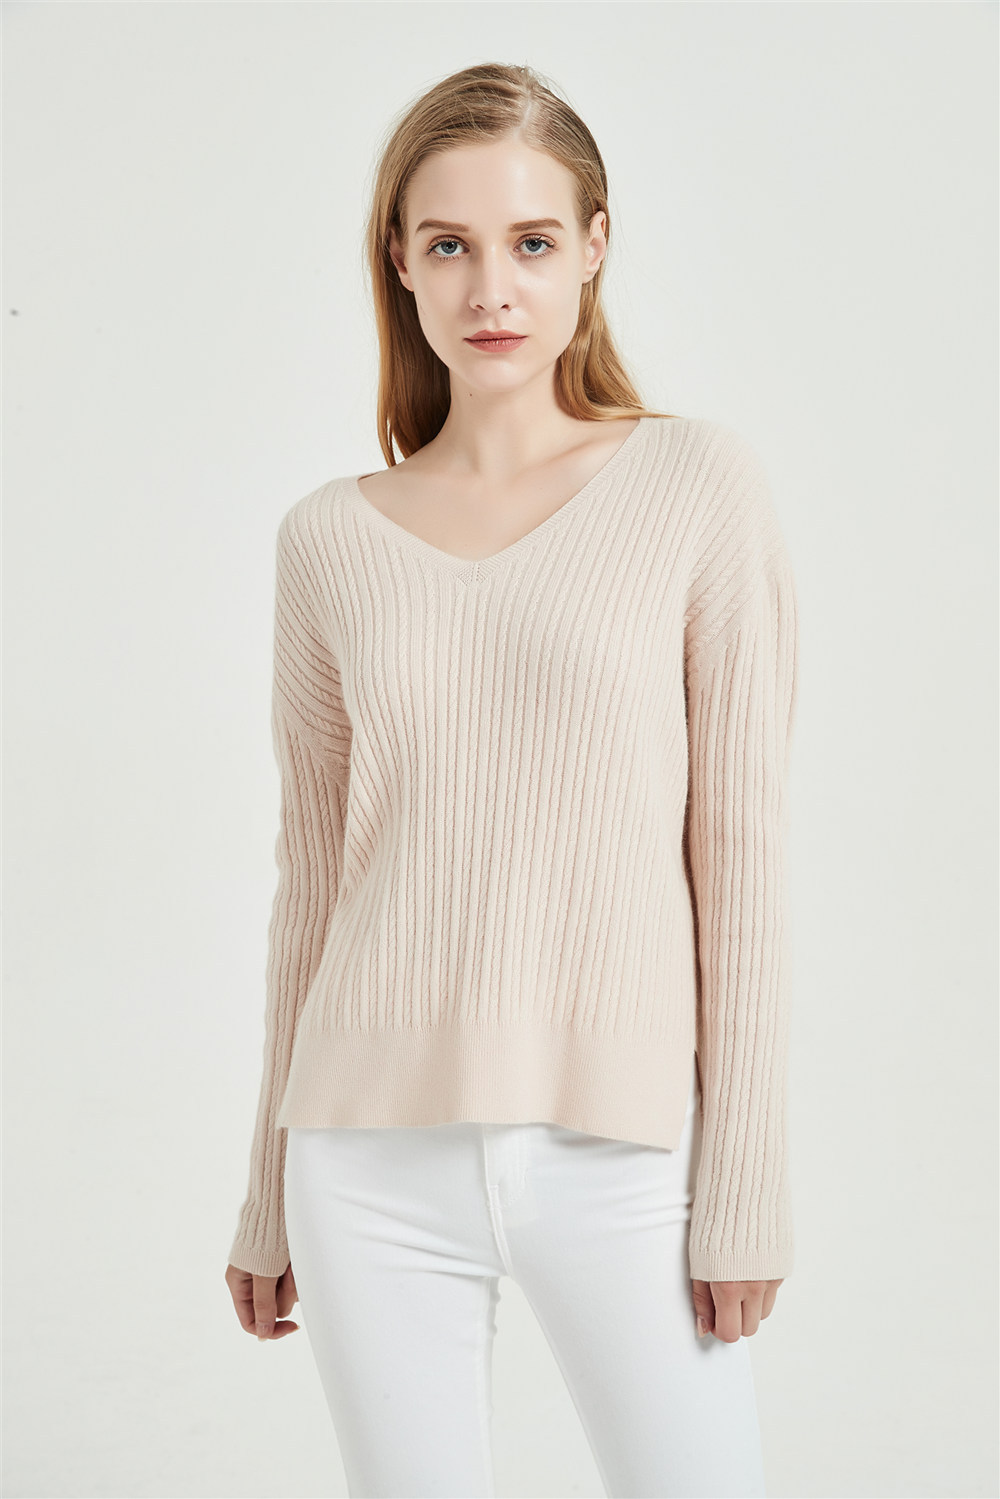 wholesale high quality pure cashmere women sweater with seamless ...